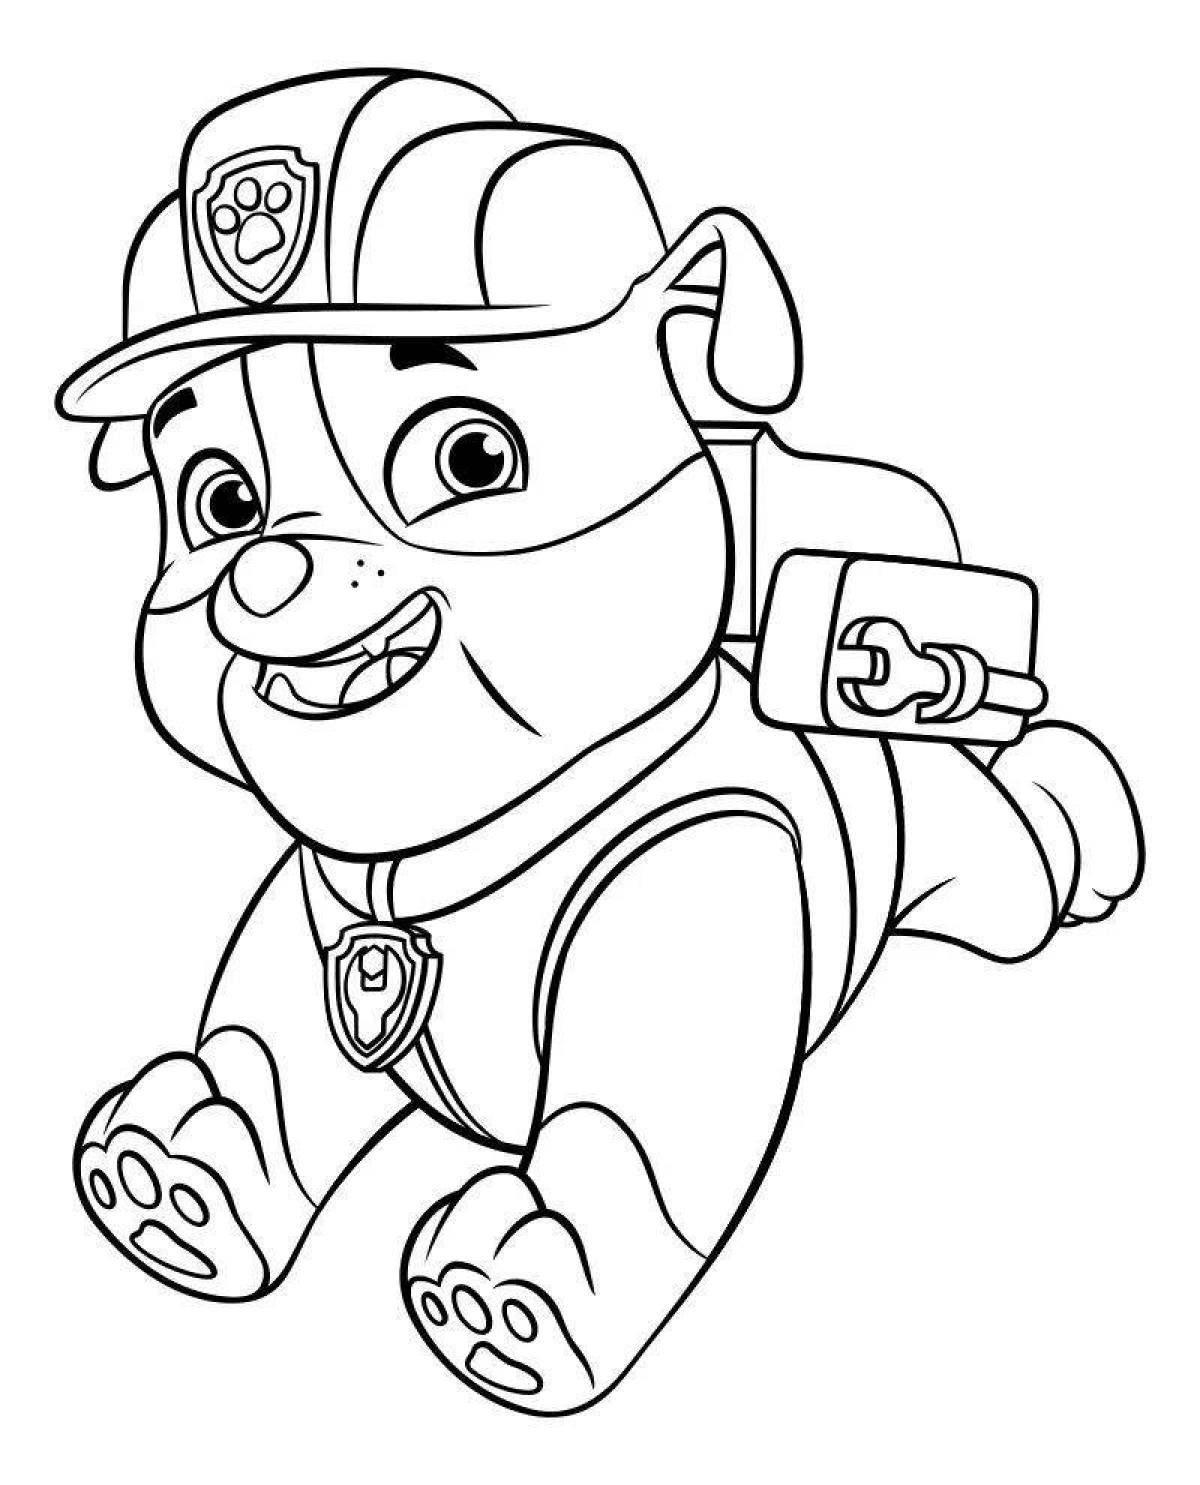 Paw Patrol coloring book for boys